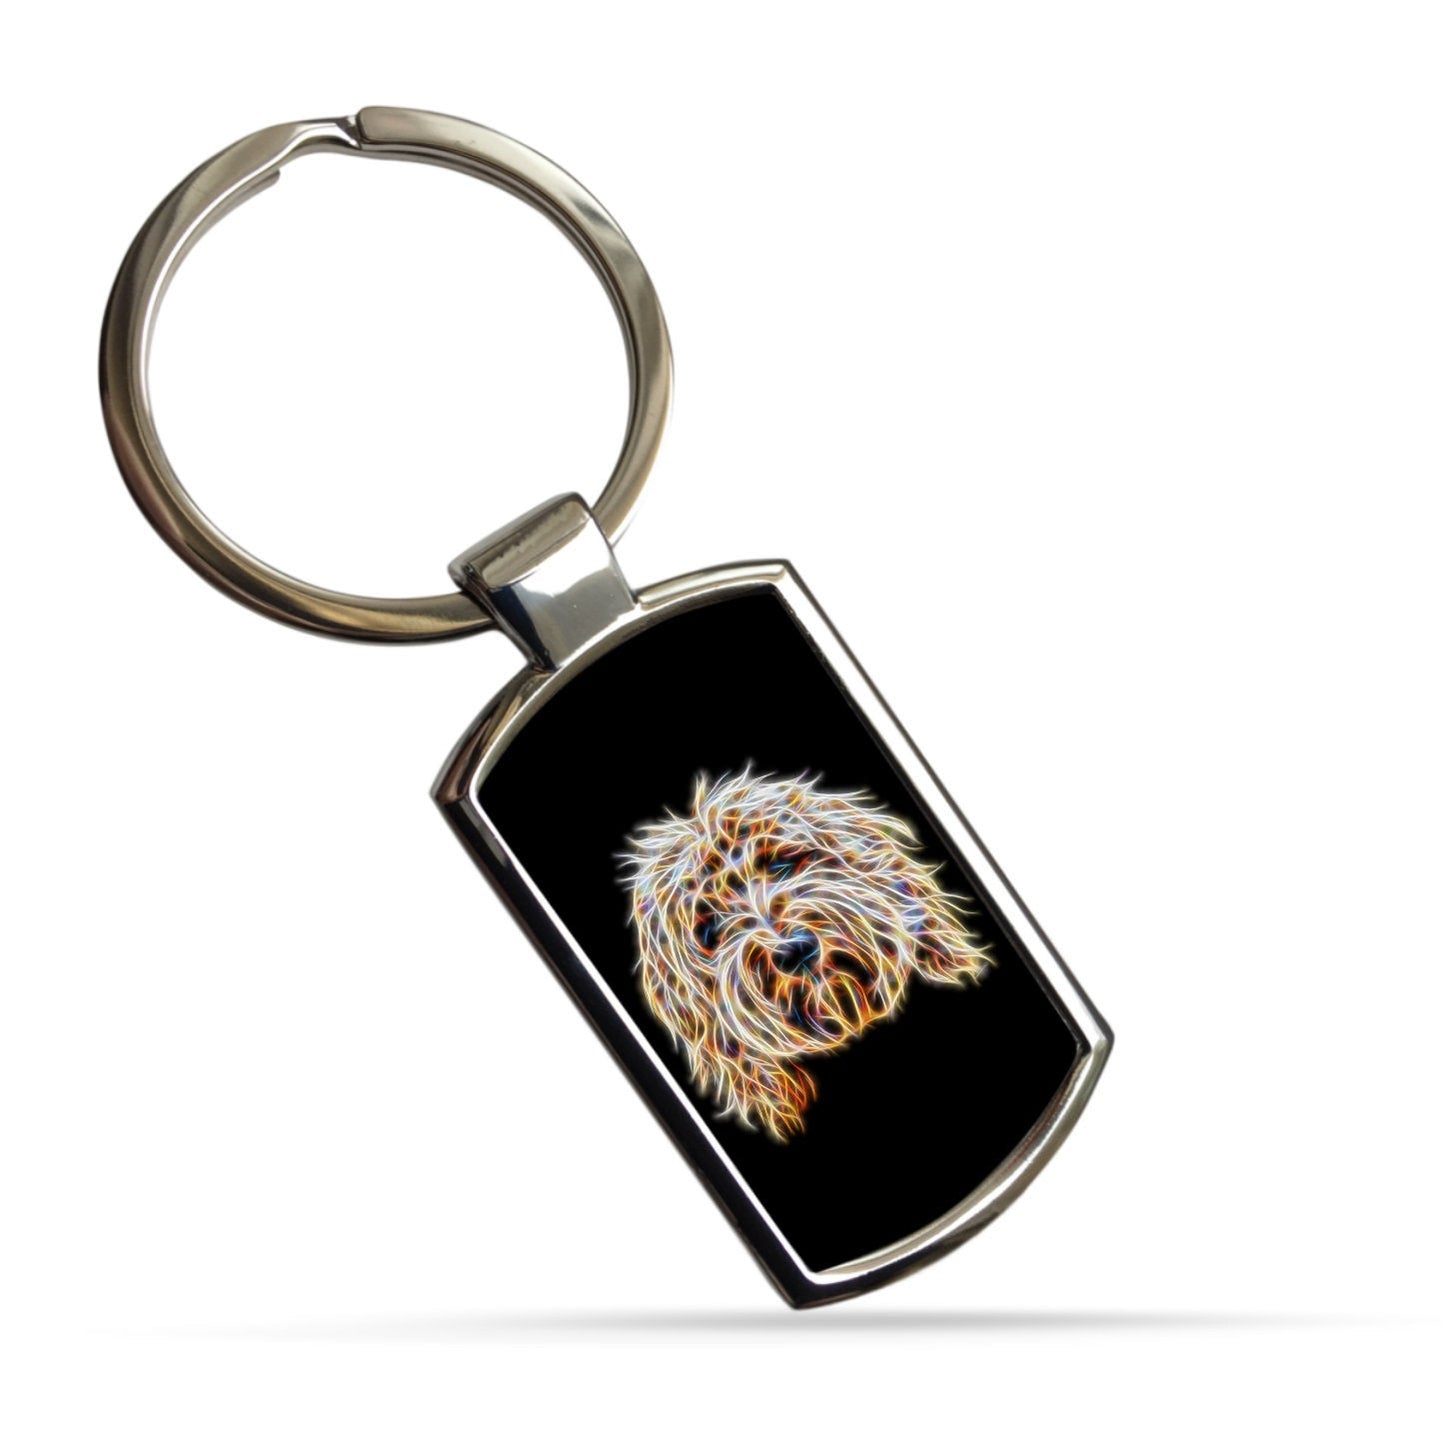 Labradoodle Keychain, Keyring, or Bagtag with Stunning Fractal Art Design. A Perfect Gift for Doodle Dog Lover.